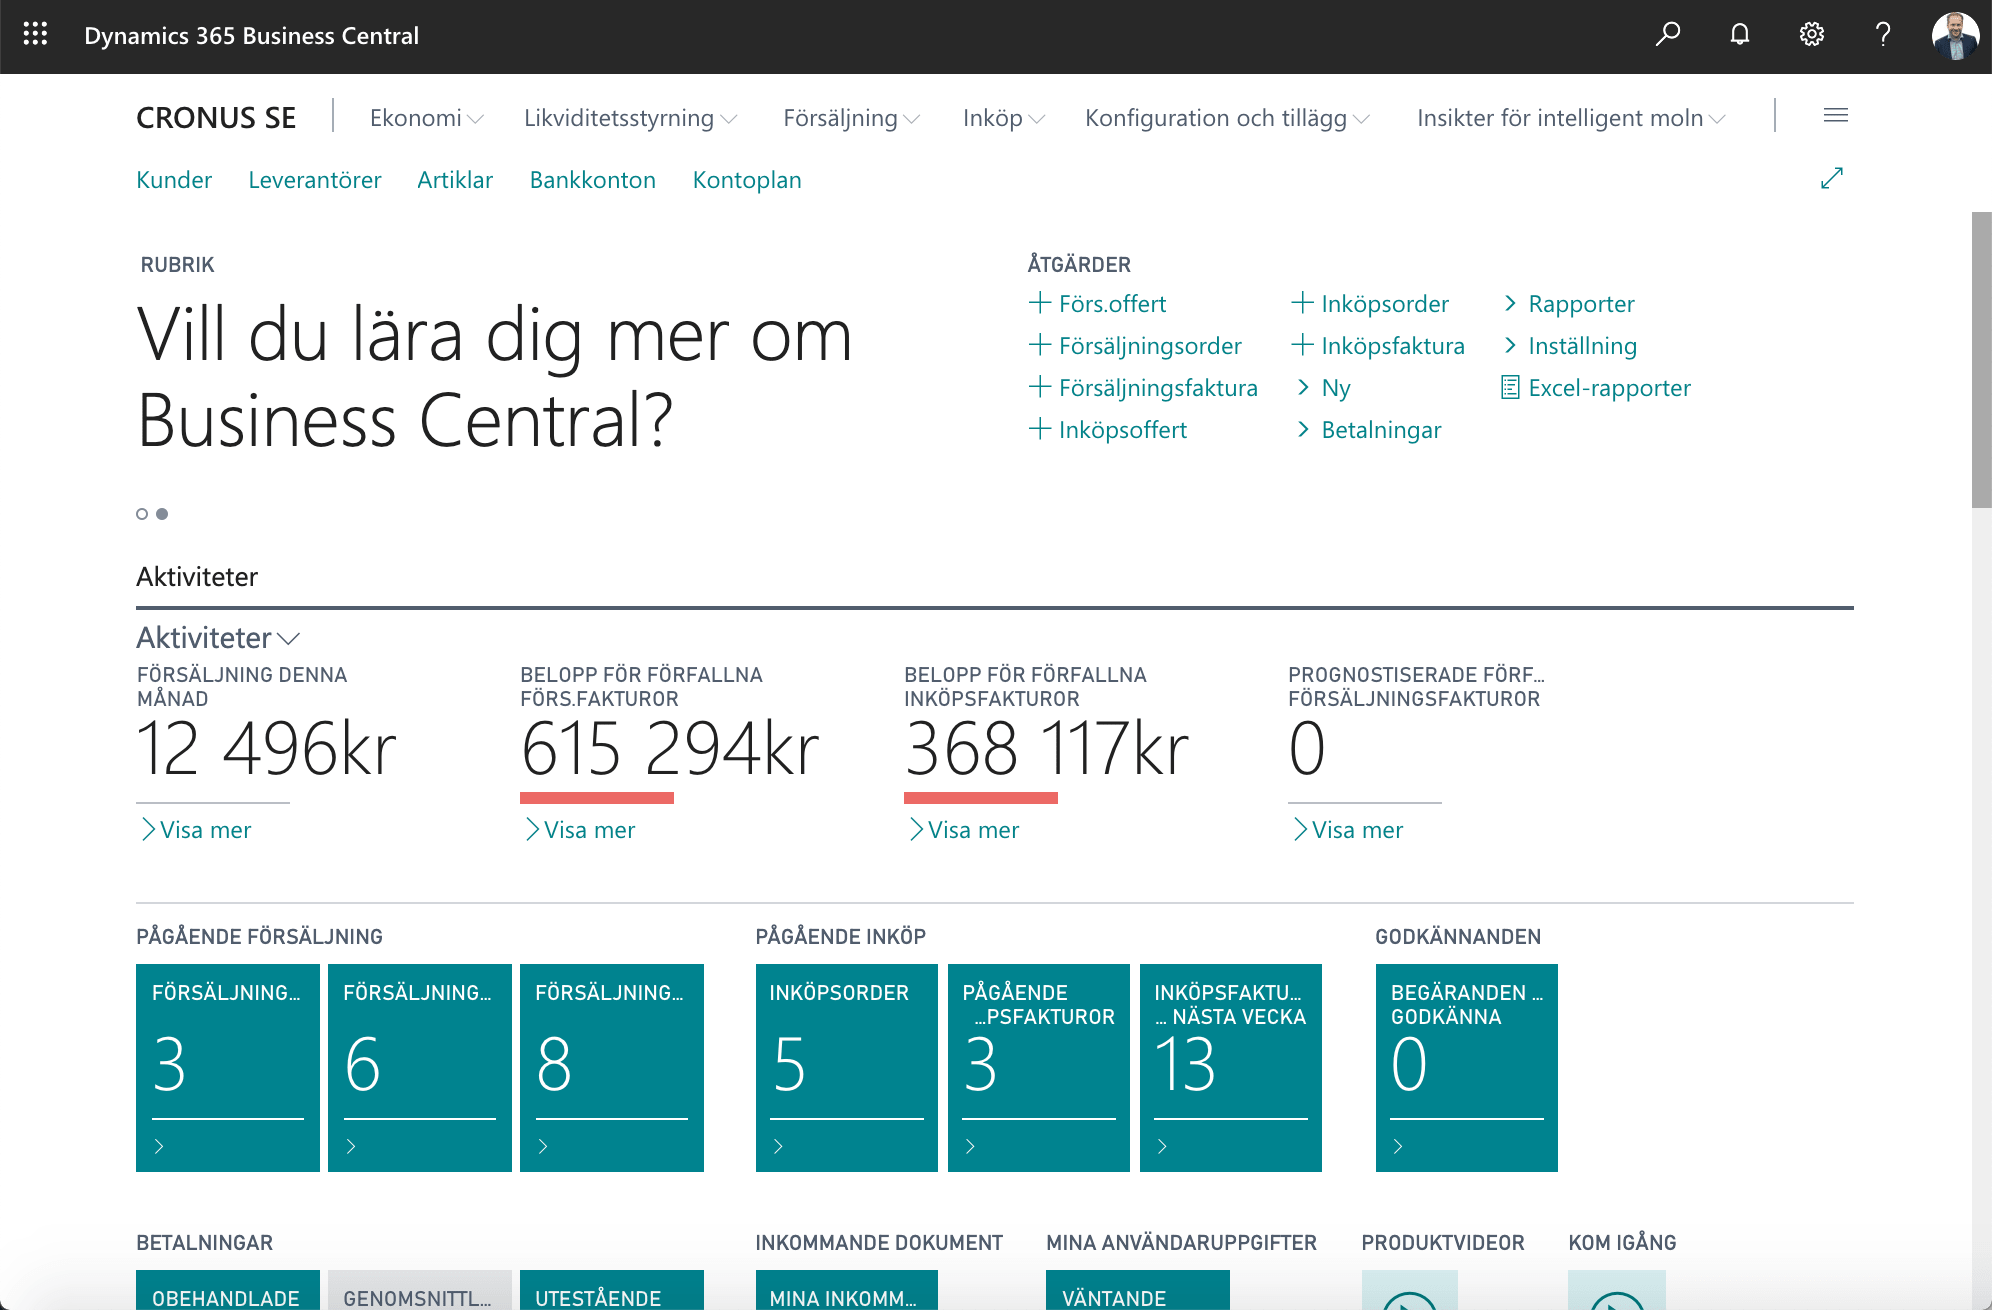 Rollcenter Chef i Dynamics 365 Business Central